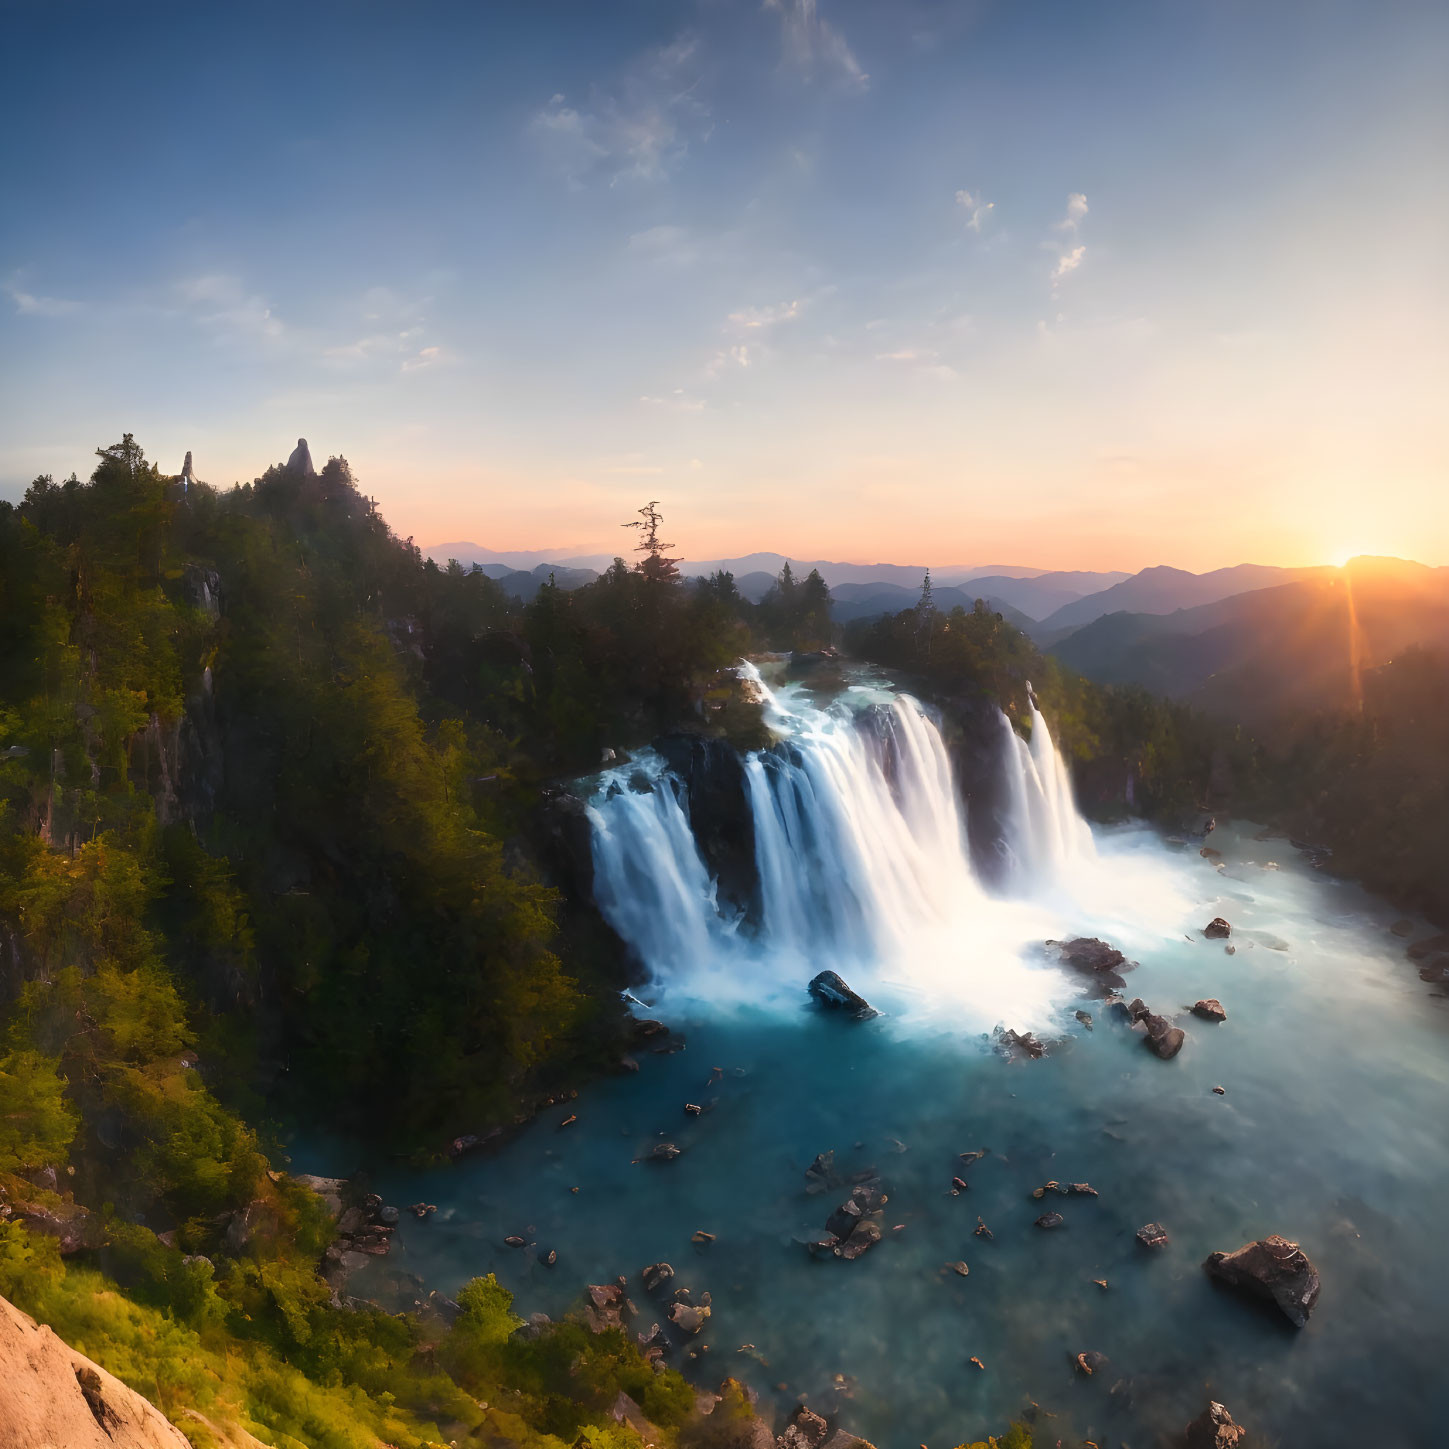 Majestic waterfall in forested landscape at sunset